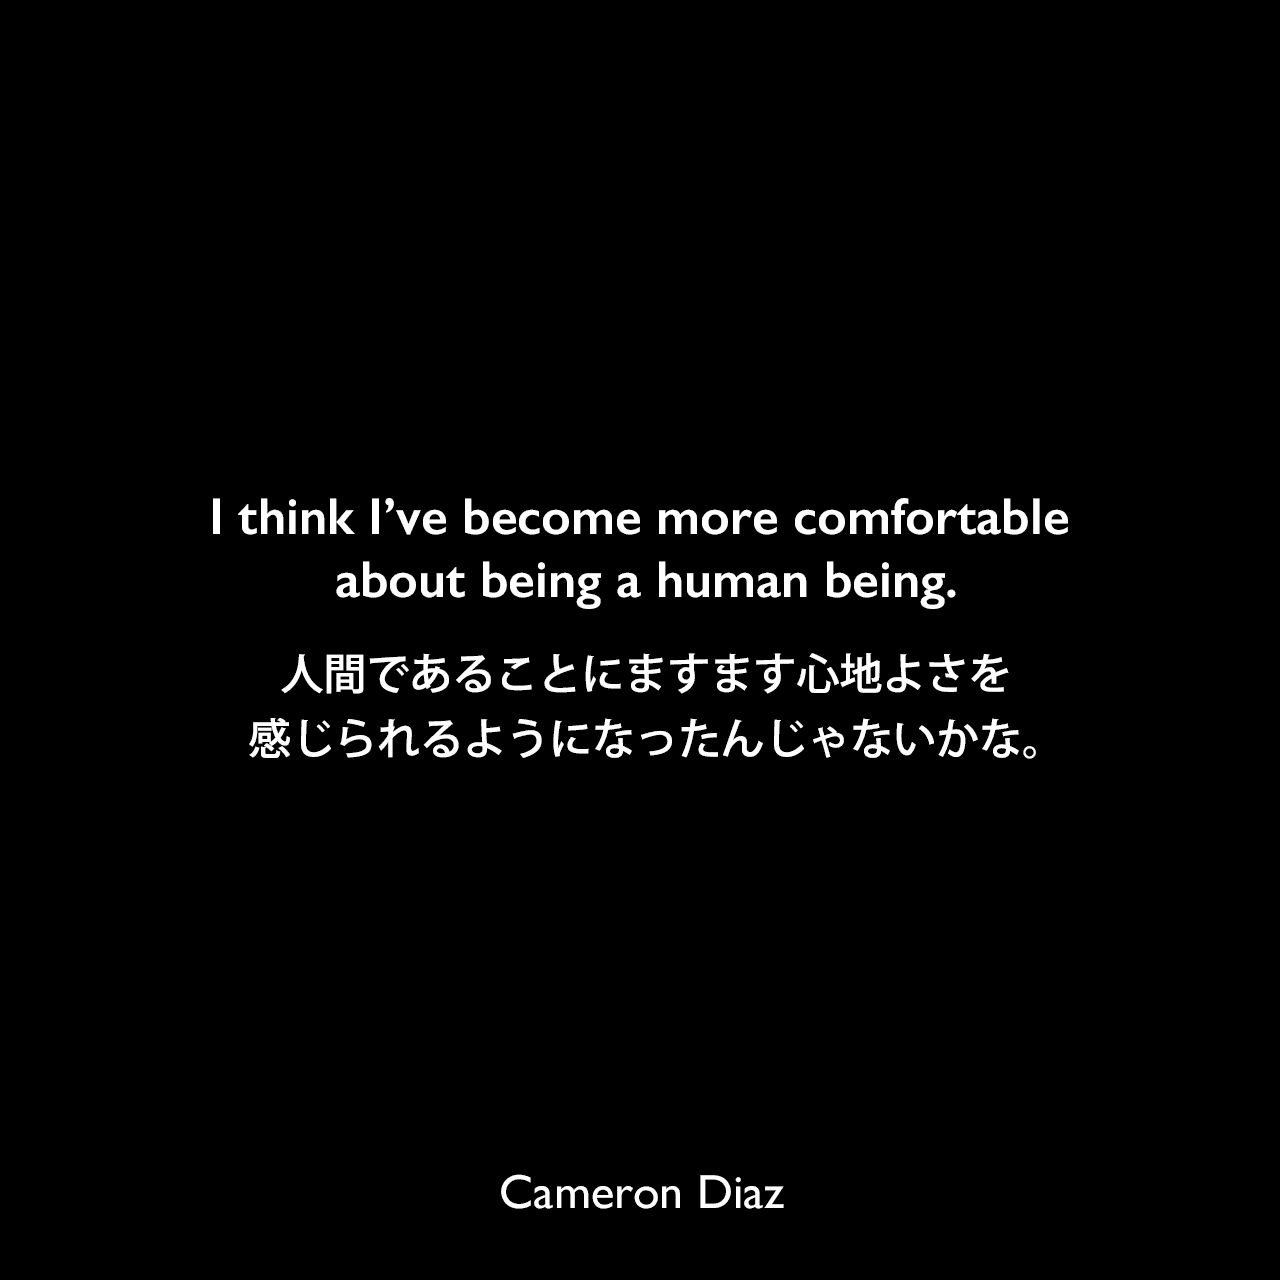 I think I’ve become more comfortable about being a human being.人間であることにますます心地よさを感じられるようになったんじゃないかな。Cameron Diaz